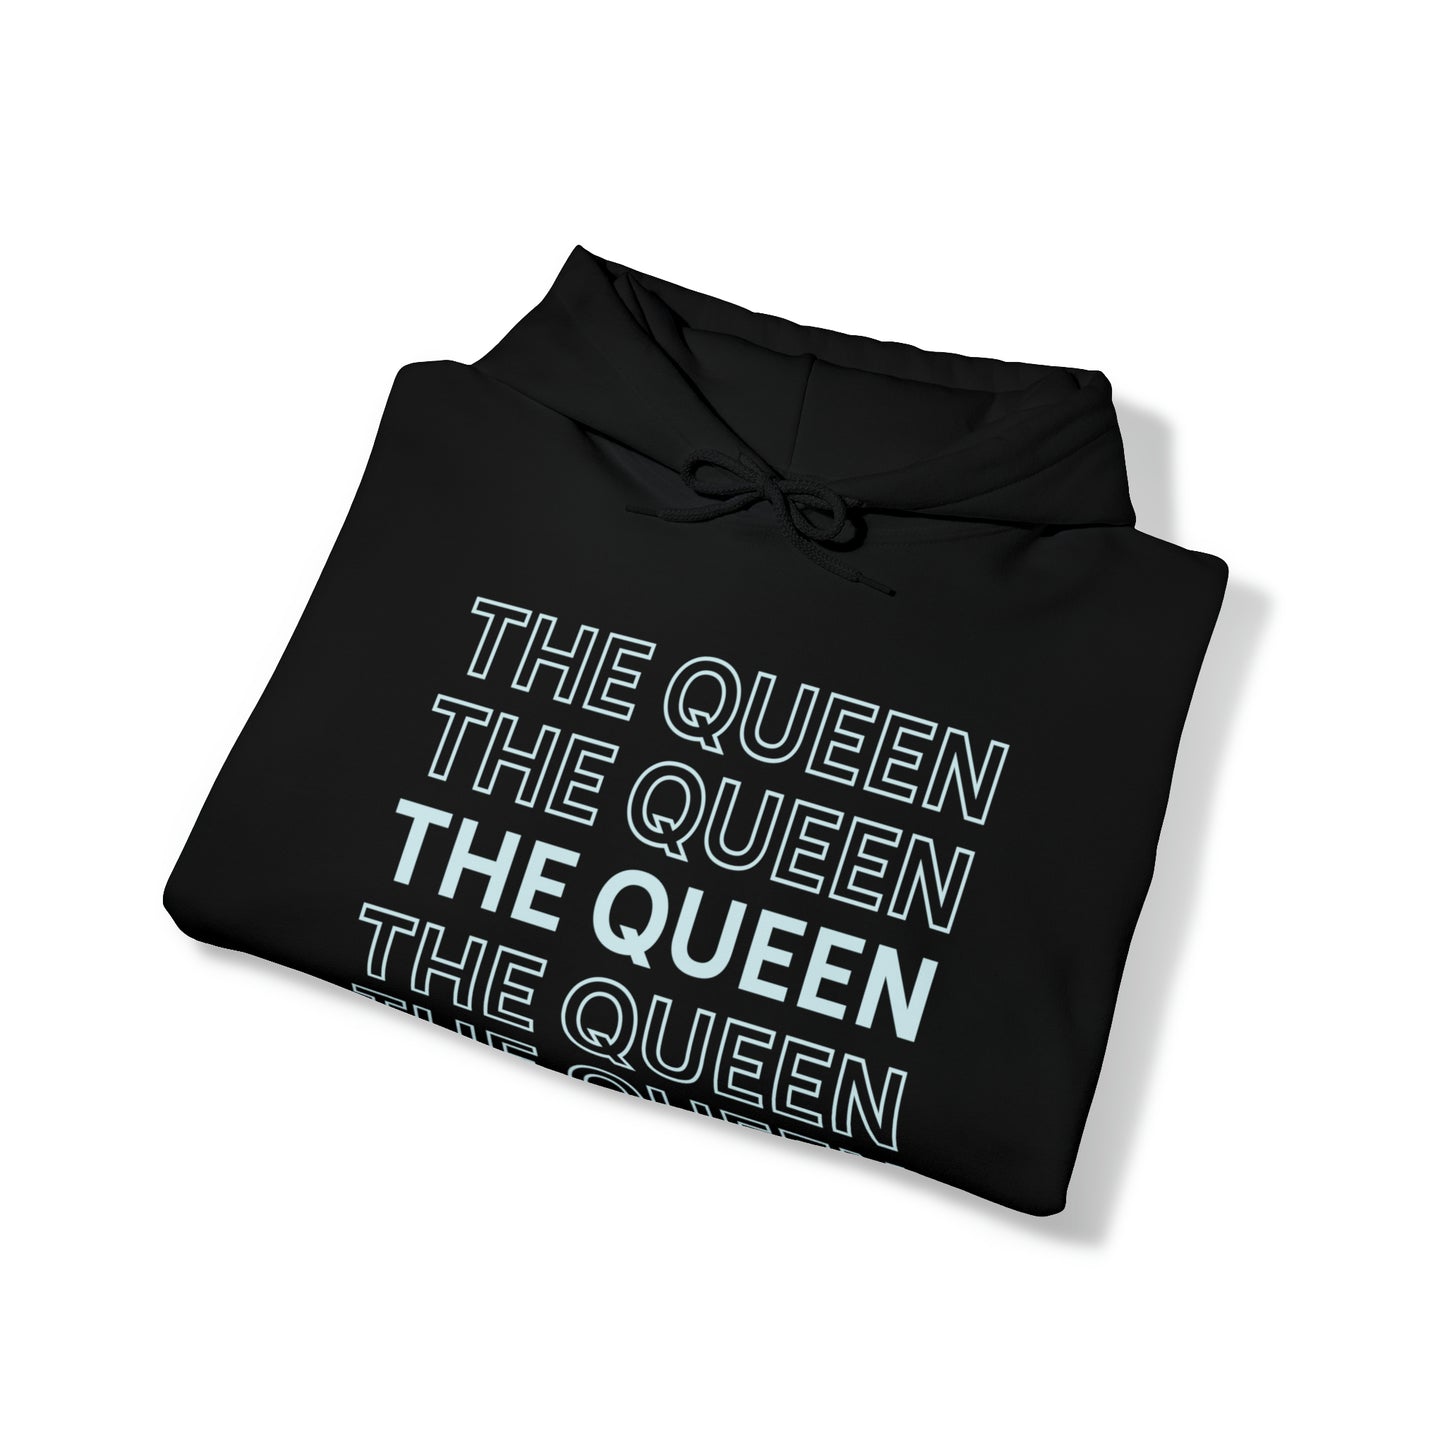 "The Queen, His Lover" Hoodie